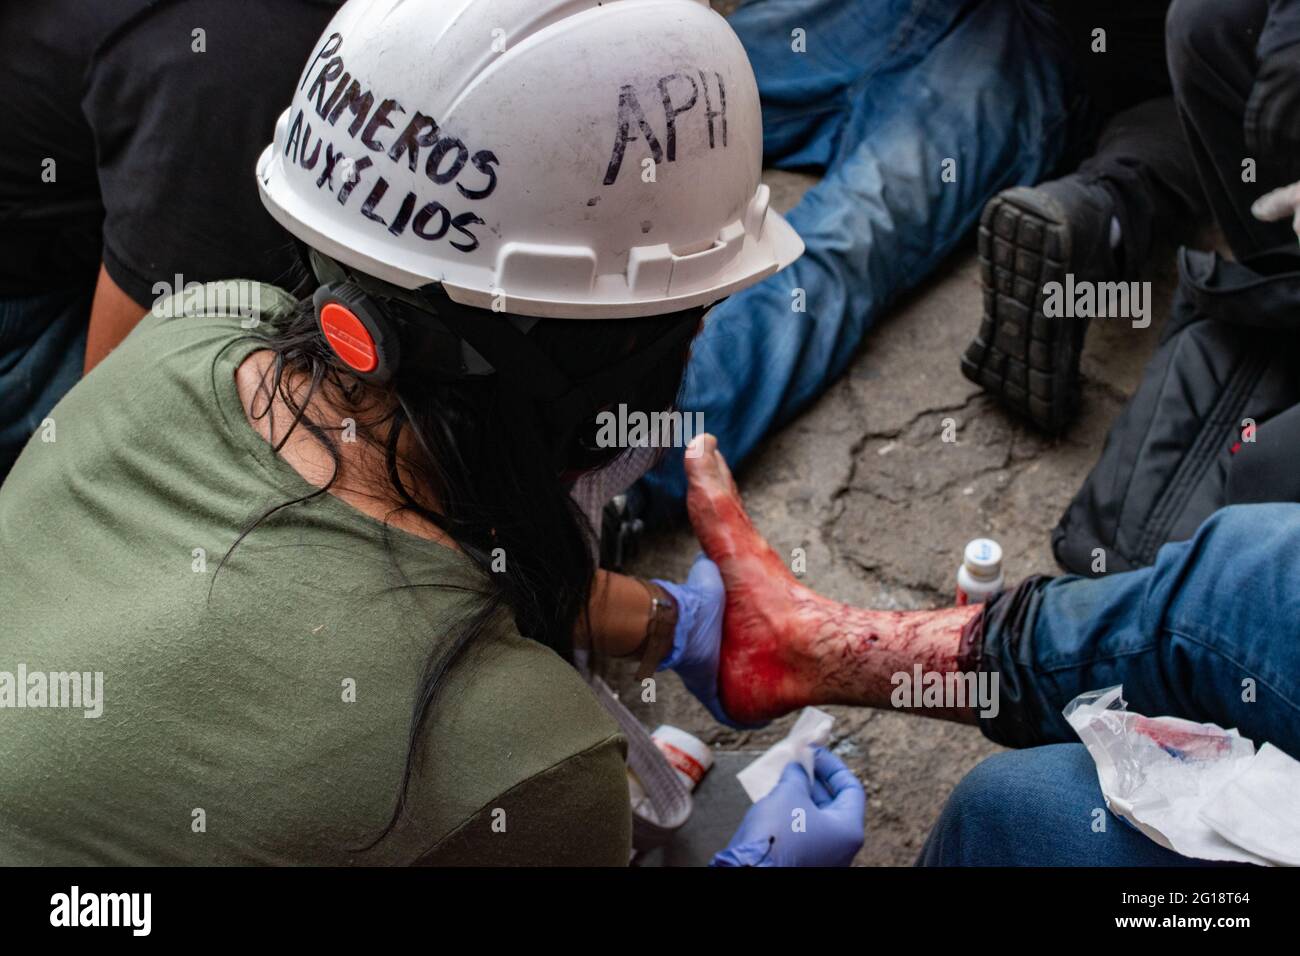 A member of a health brigade assists an injured demonstrator as clashes between demonstrators and Colombia's riot police (ESMAD) erupt in Medellín, Colombia after several weeks of anti-government protest against President Ivan Duque's tax and health reforms and unrest and abuse of authority cases that leave at least 70 dead according to NGOs on June 4, 2021. Stock Photo